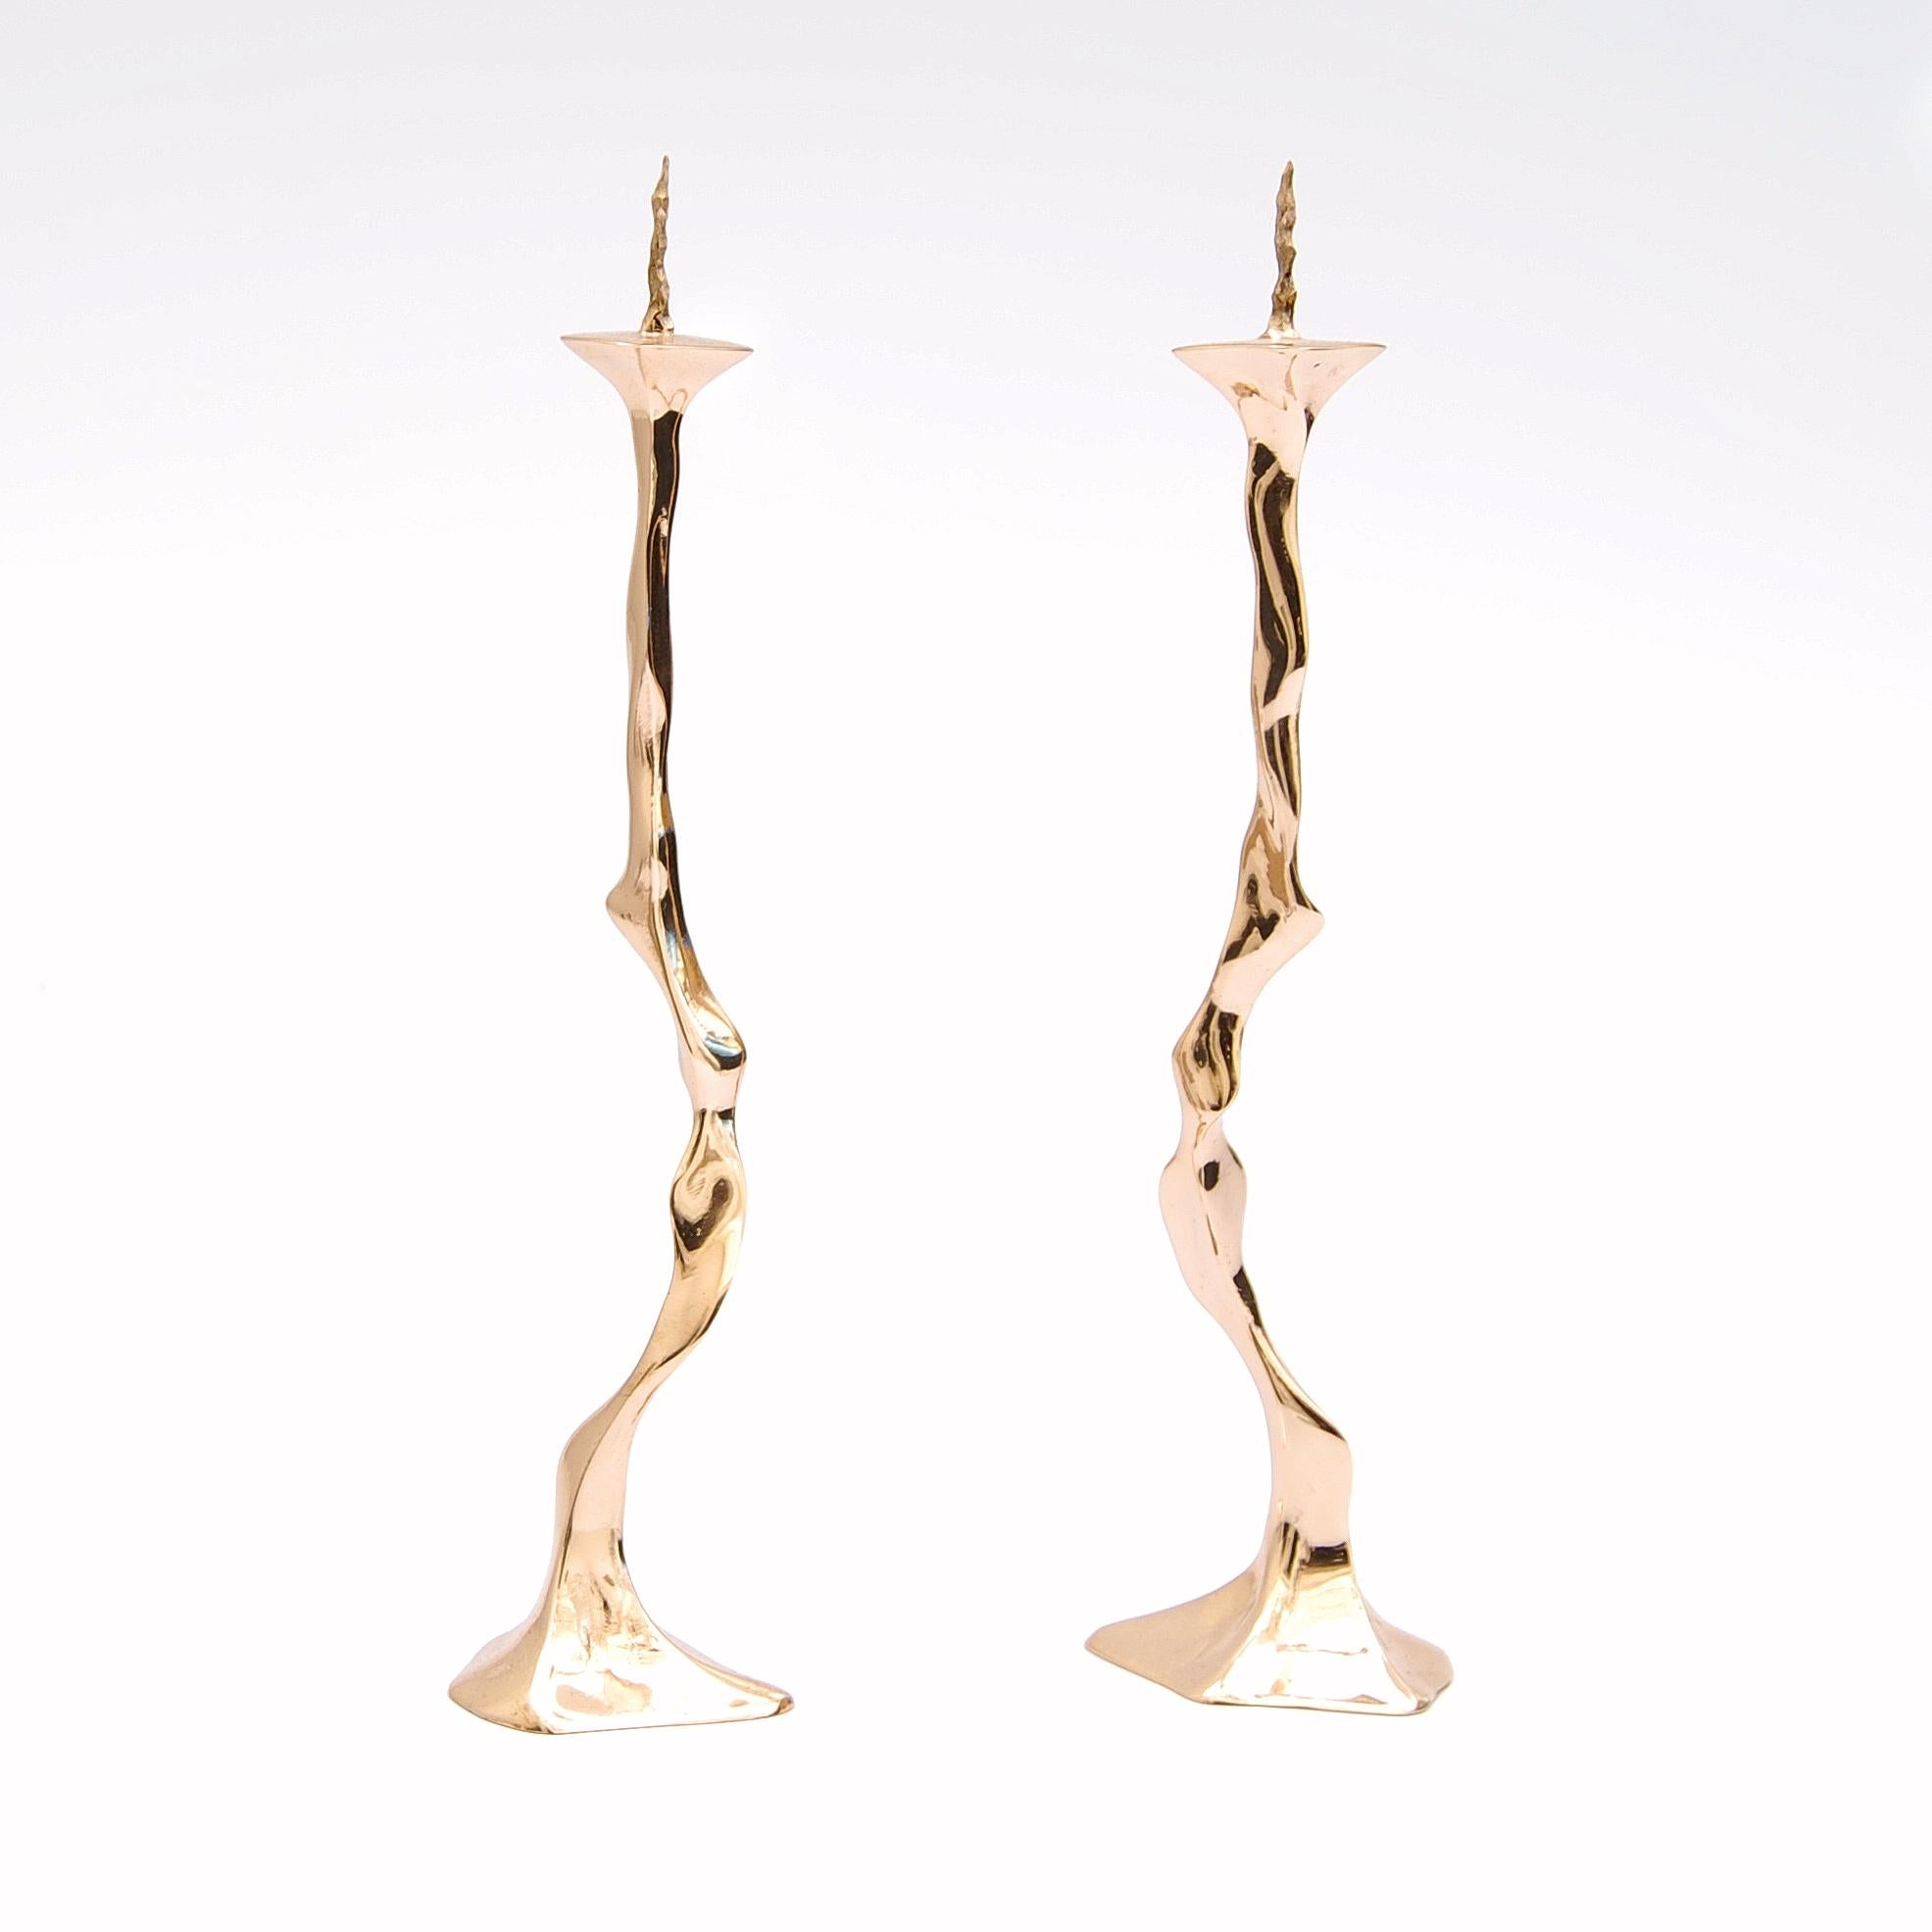 Set of 2 Debbie candlesticks by Fakasaka Design
Dimensions: W 6 cm D 5 cm H 24 cm each.
Materials: polished bronze.

 FAKASAKA is a design company focused on production of high-end furniture, lighting, decorative objects, jewels, and